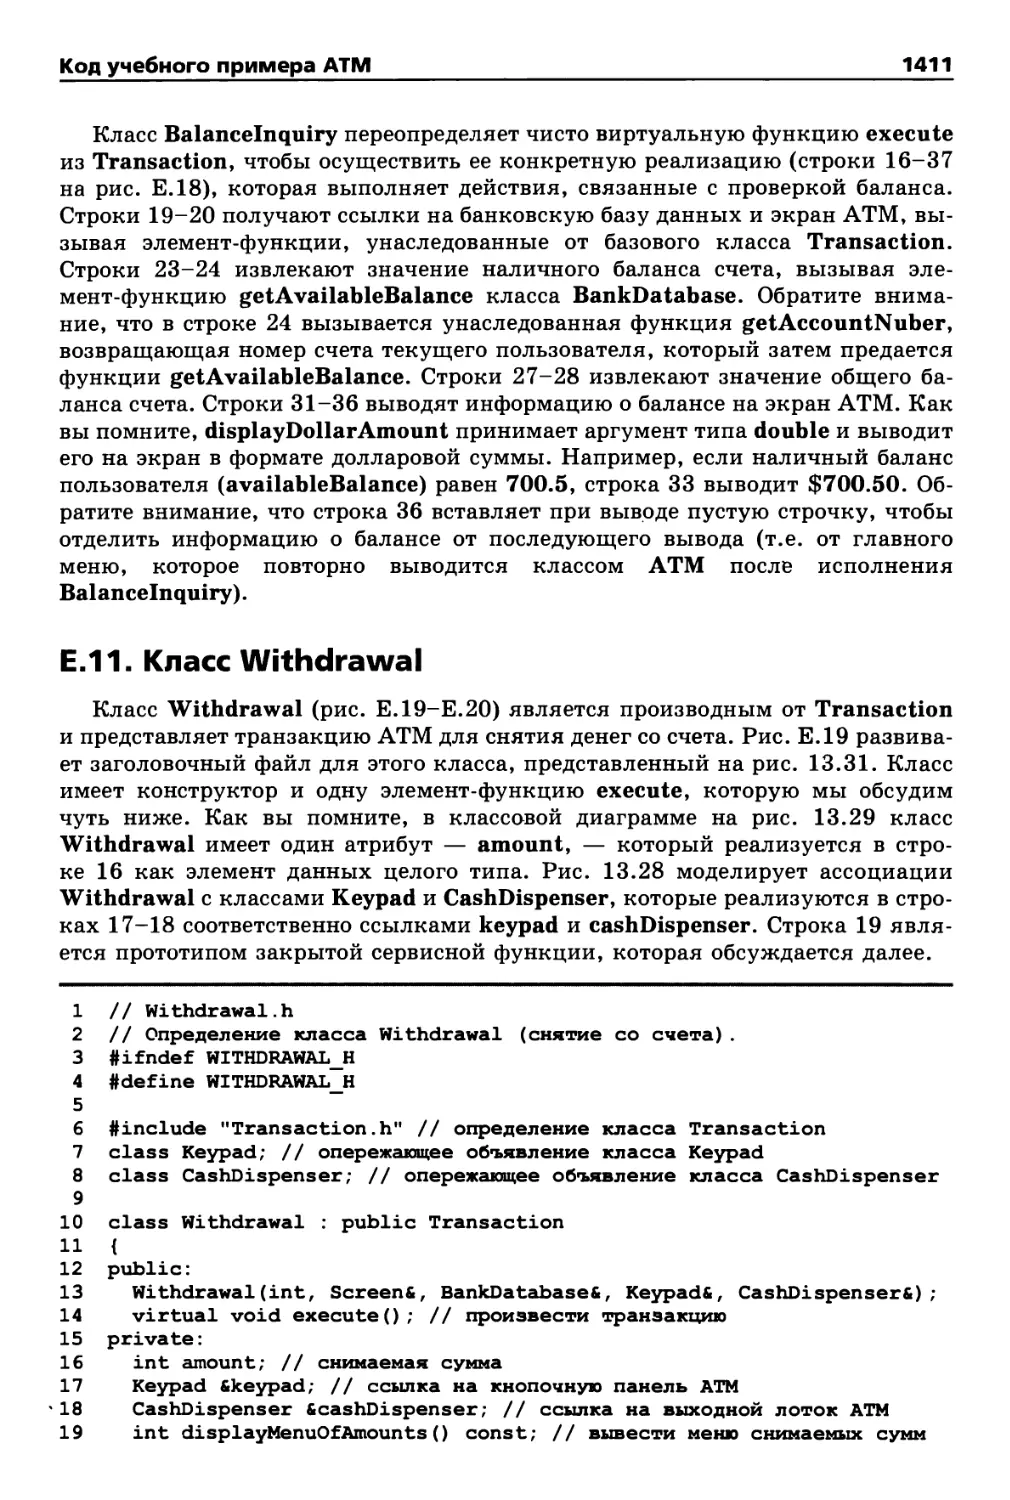 Е. 11. Класс Withdrawal